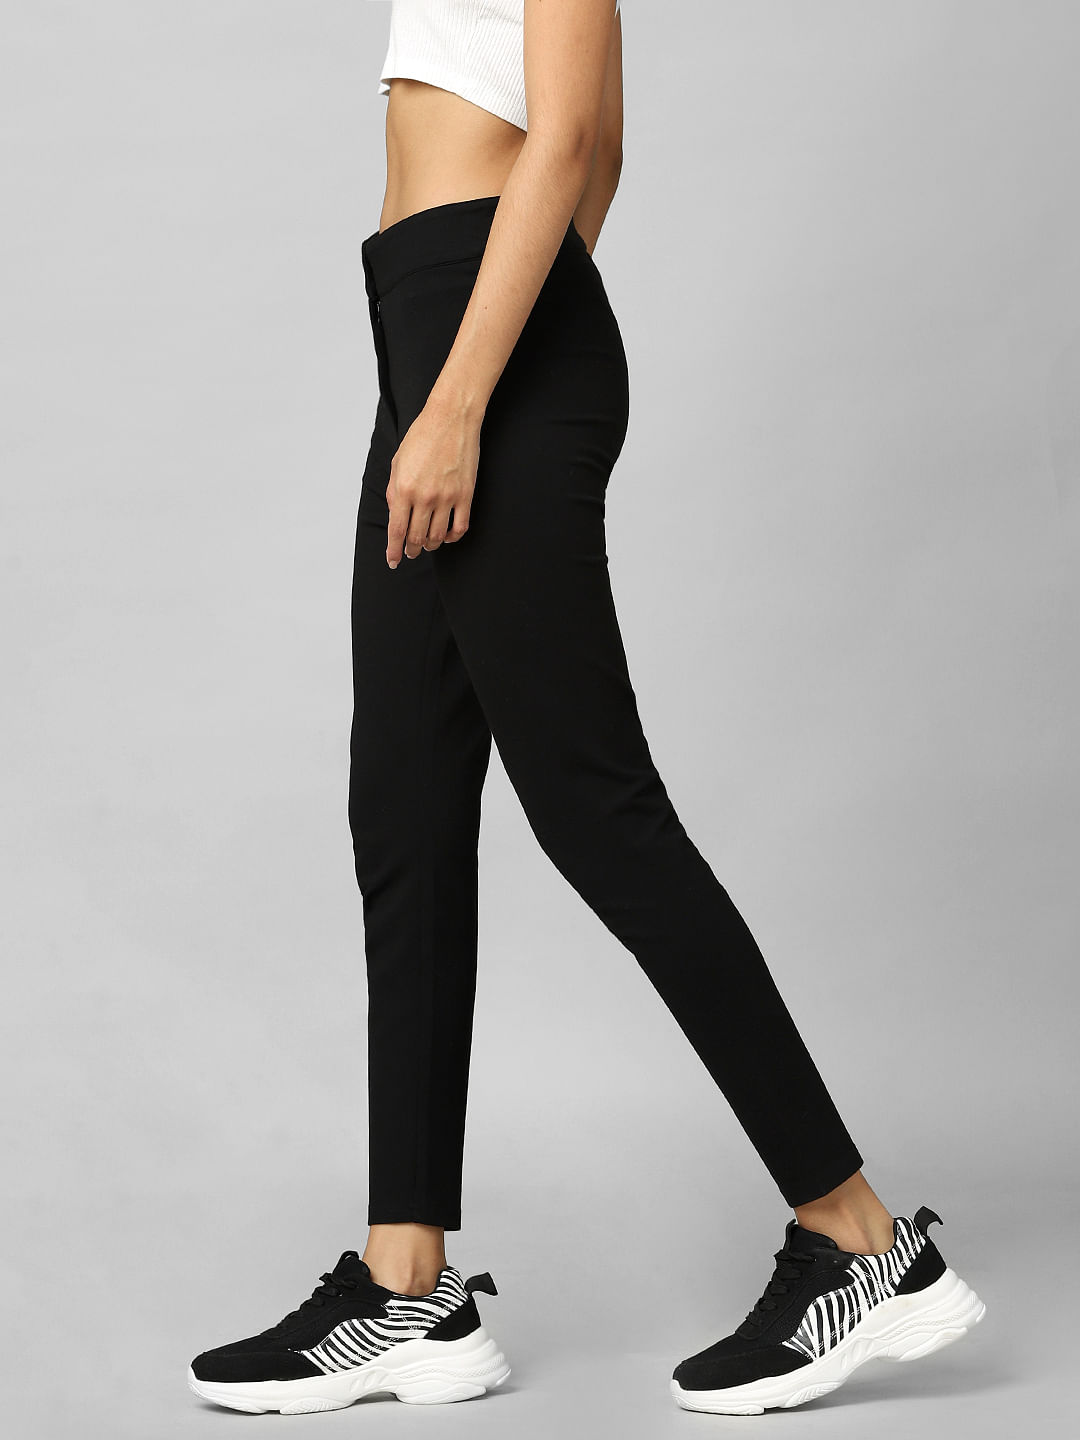 Overall Contrast Stitch Detail Thumbhole Crop Top and Leggings Set